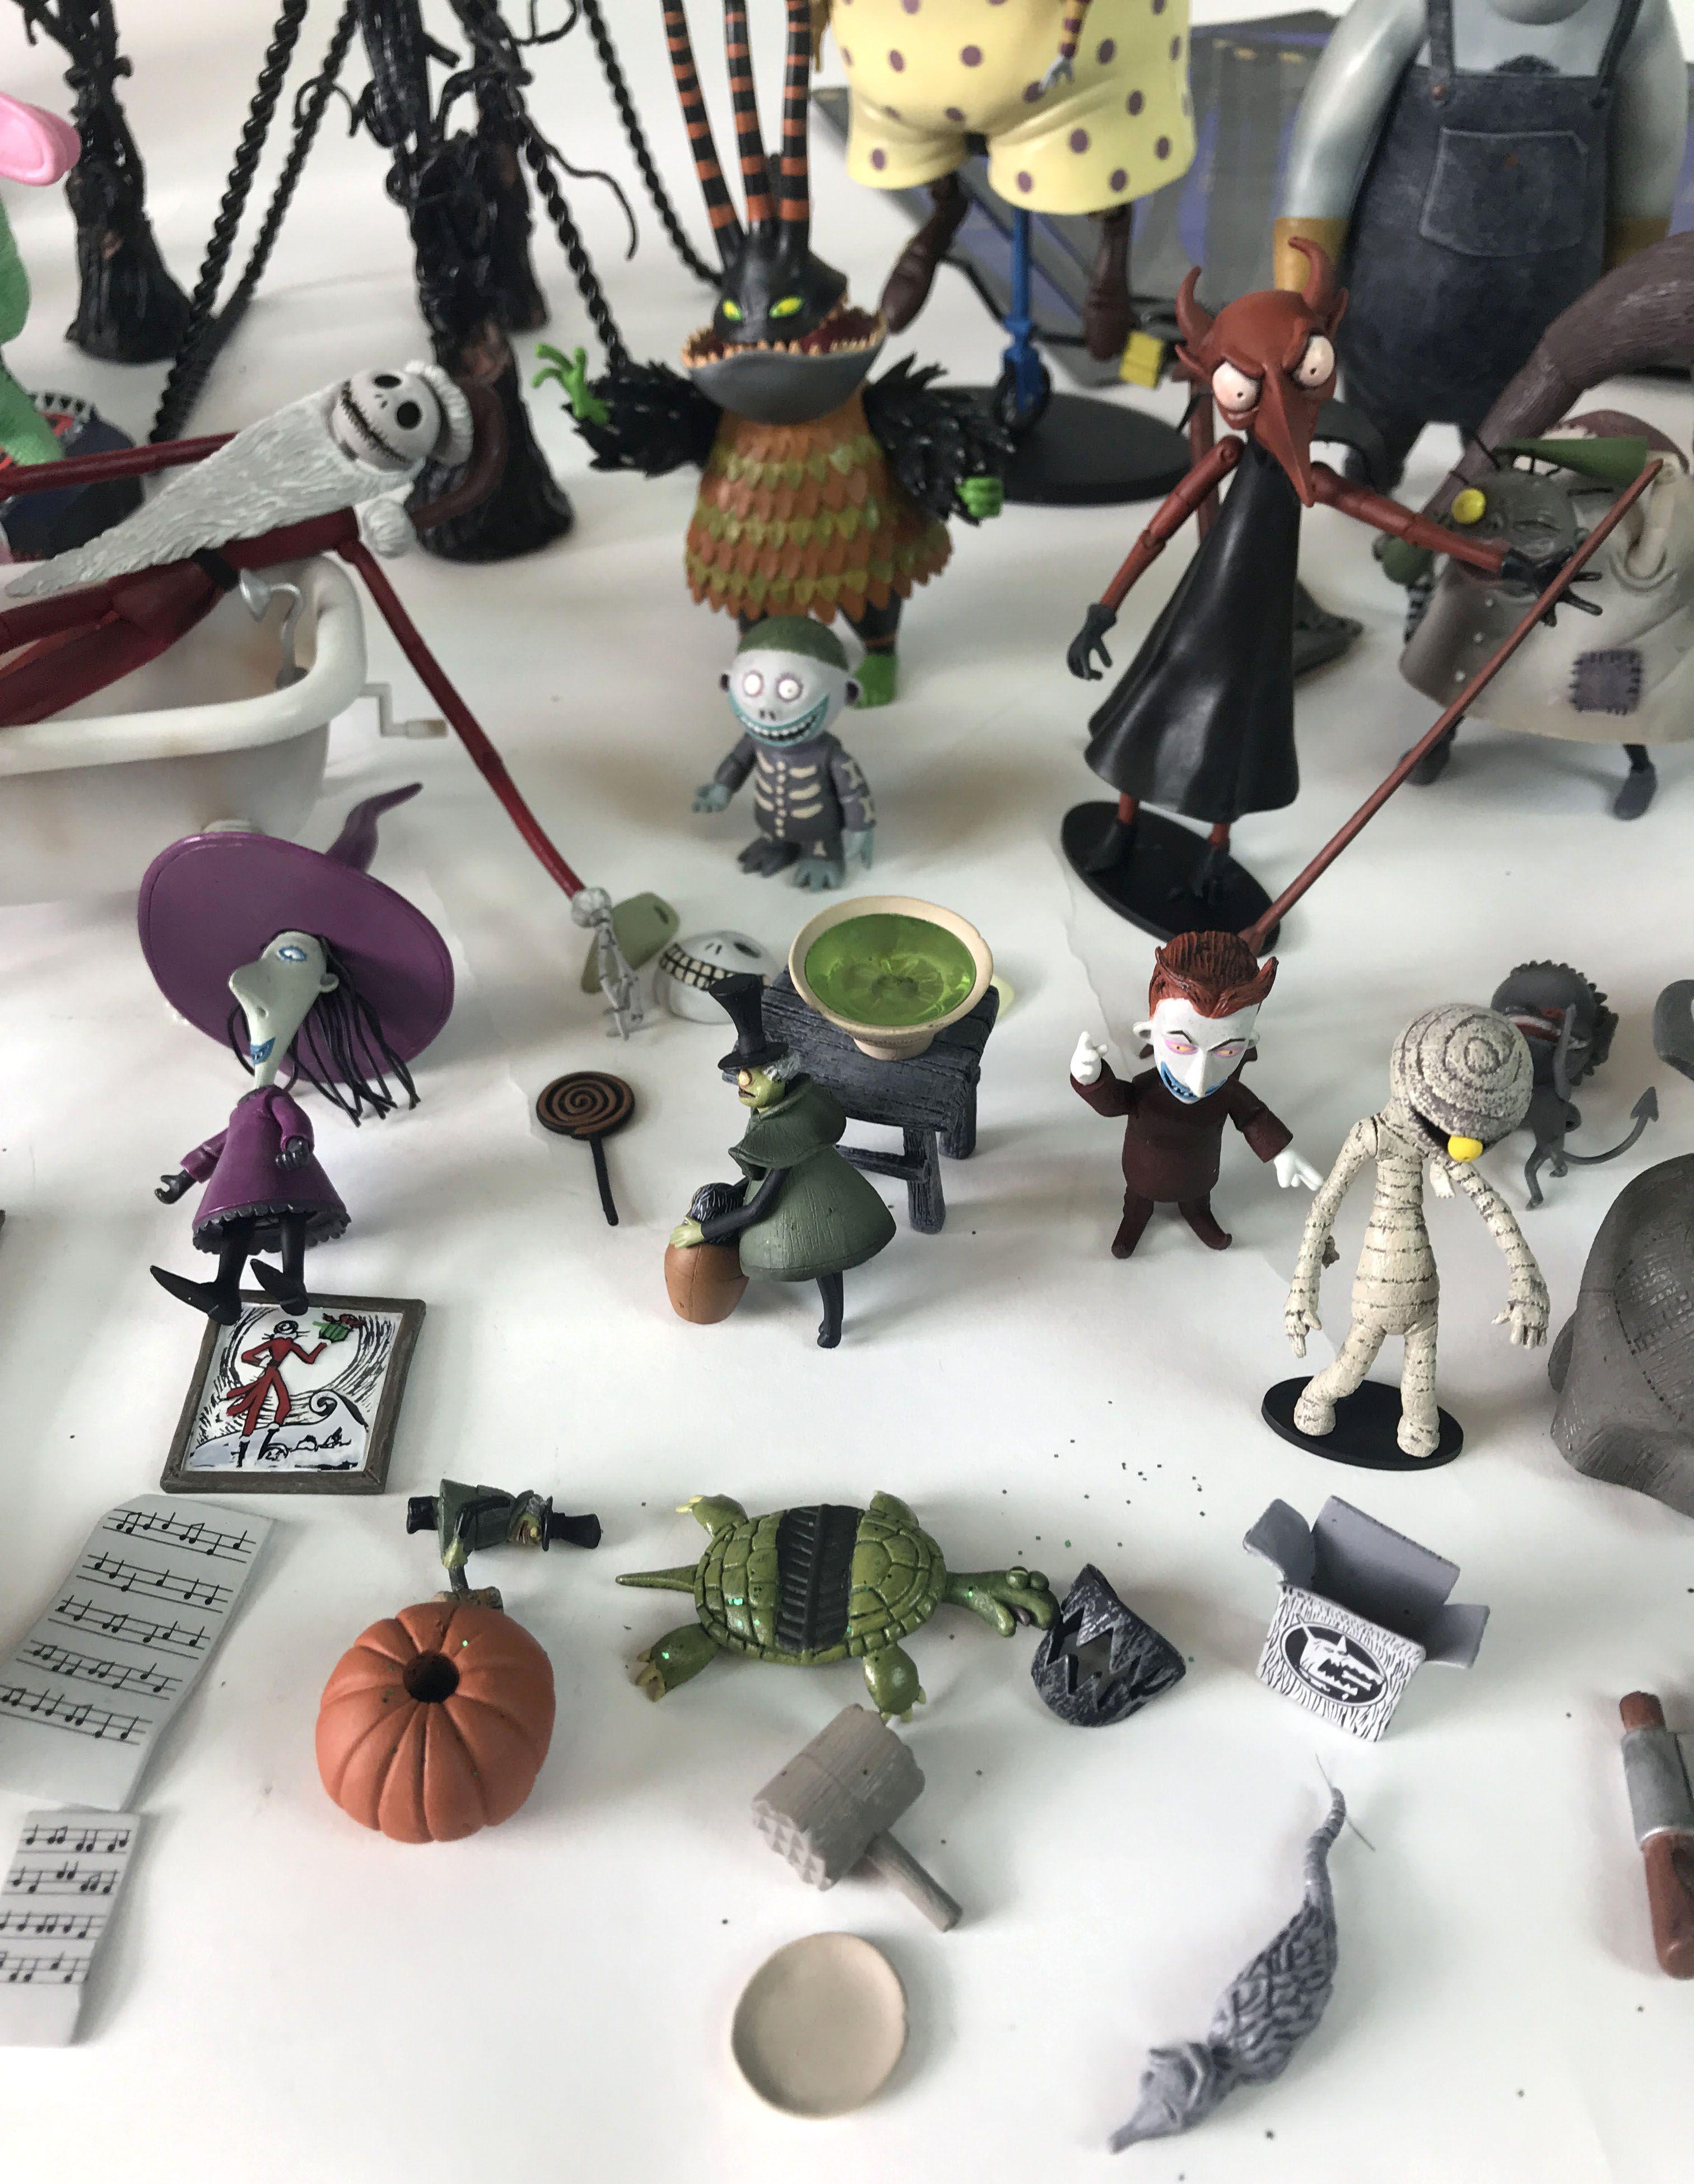 Touchstone Pictures NECA Tim Burton's The Nightmare Before Christmas Figures Collection